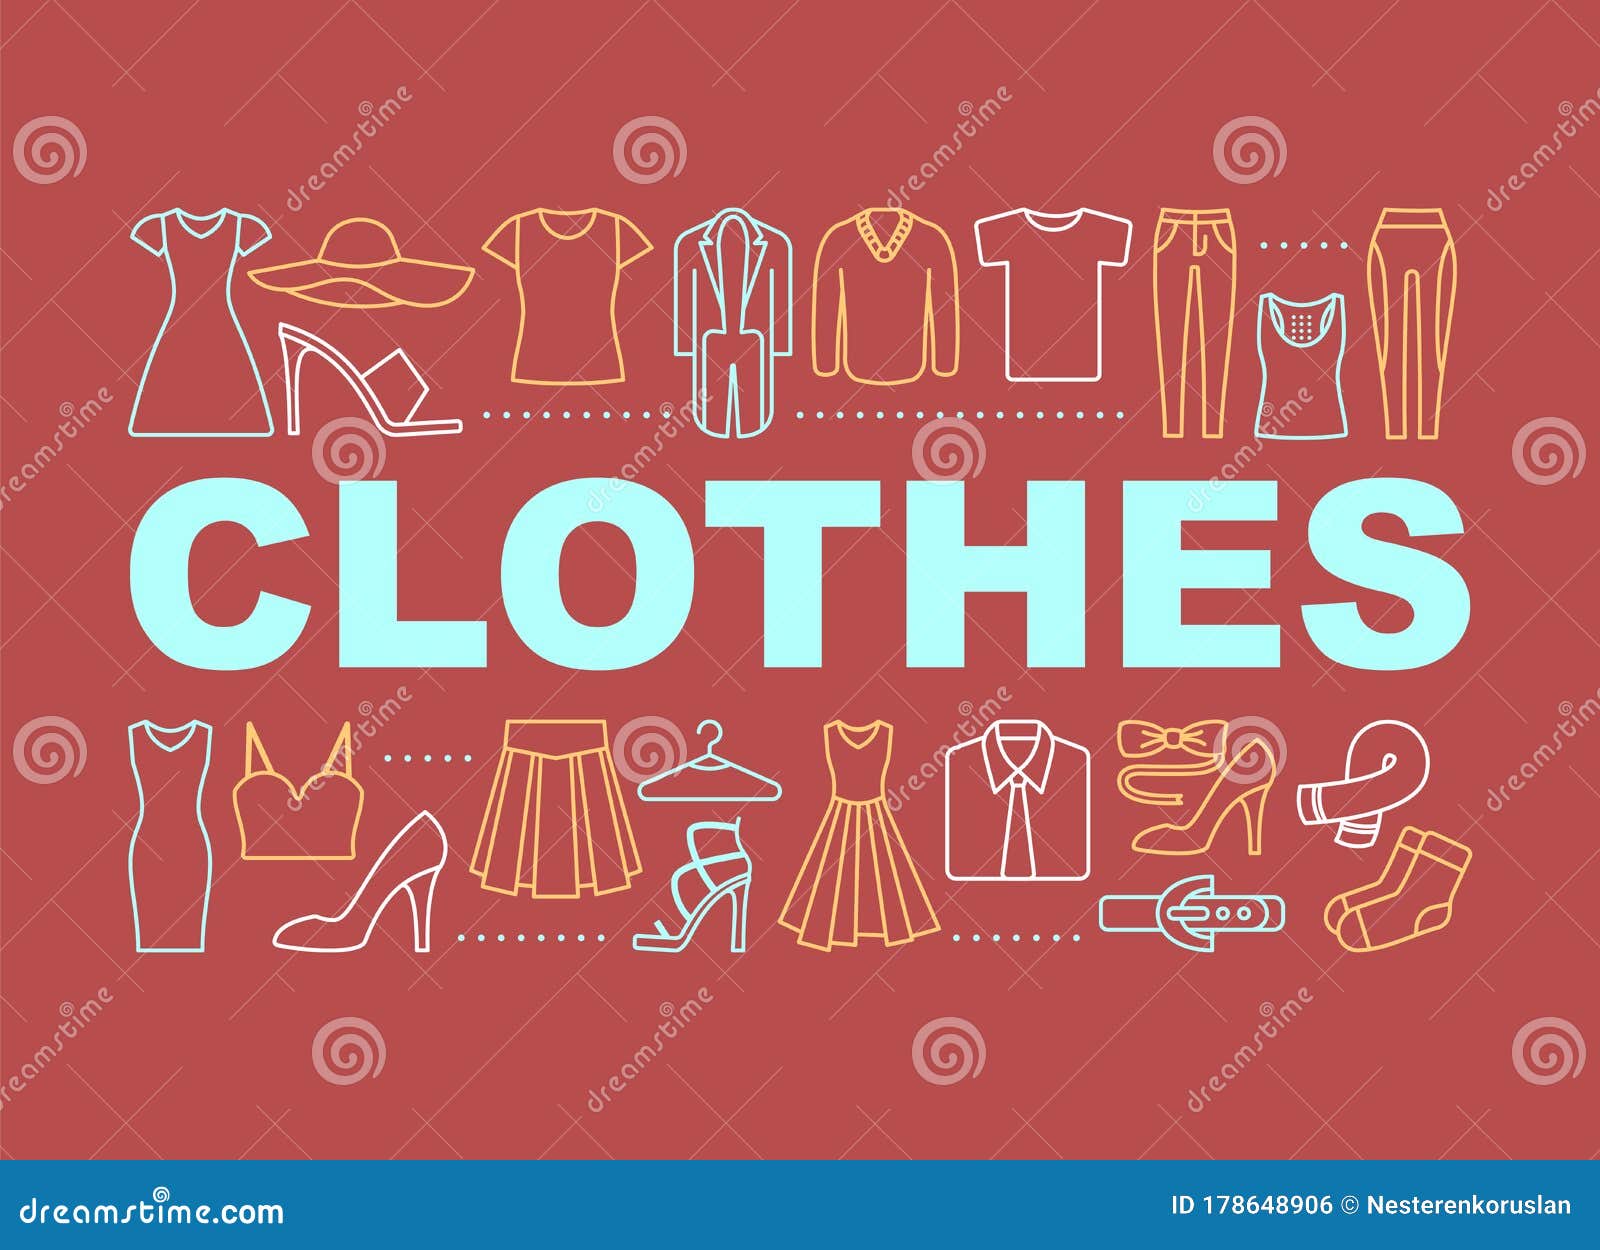 Old Clothes And Word UPCYCLING, Isolated On White. Flat Style Vector ...